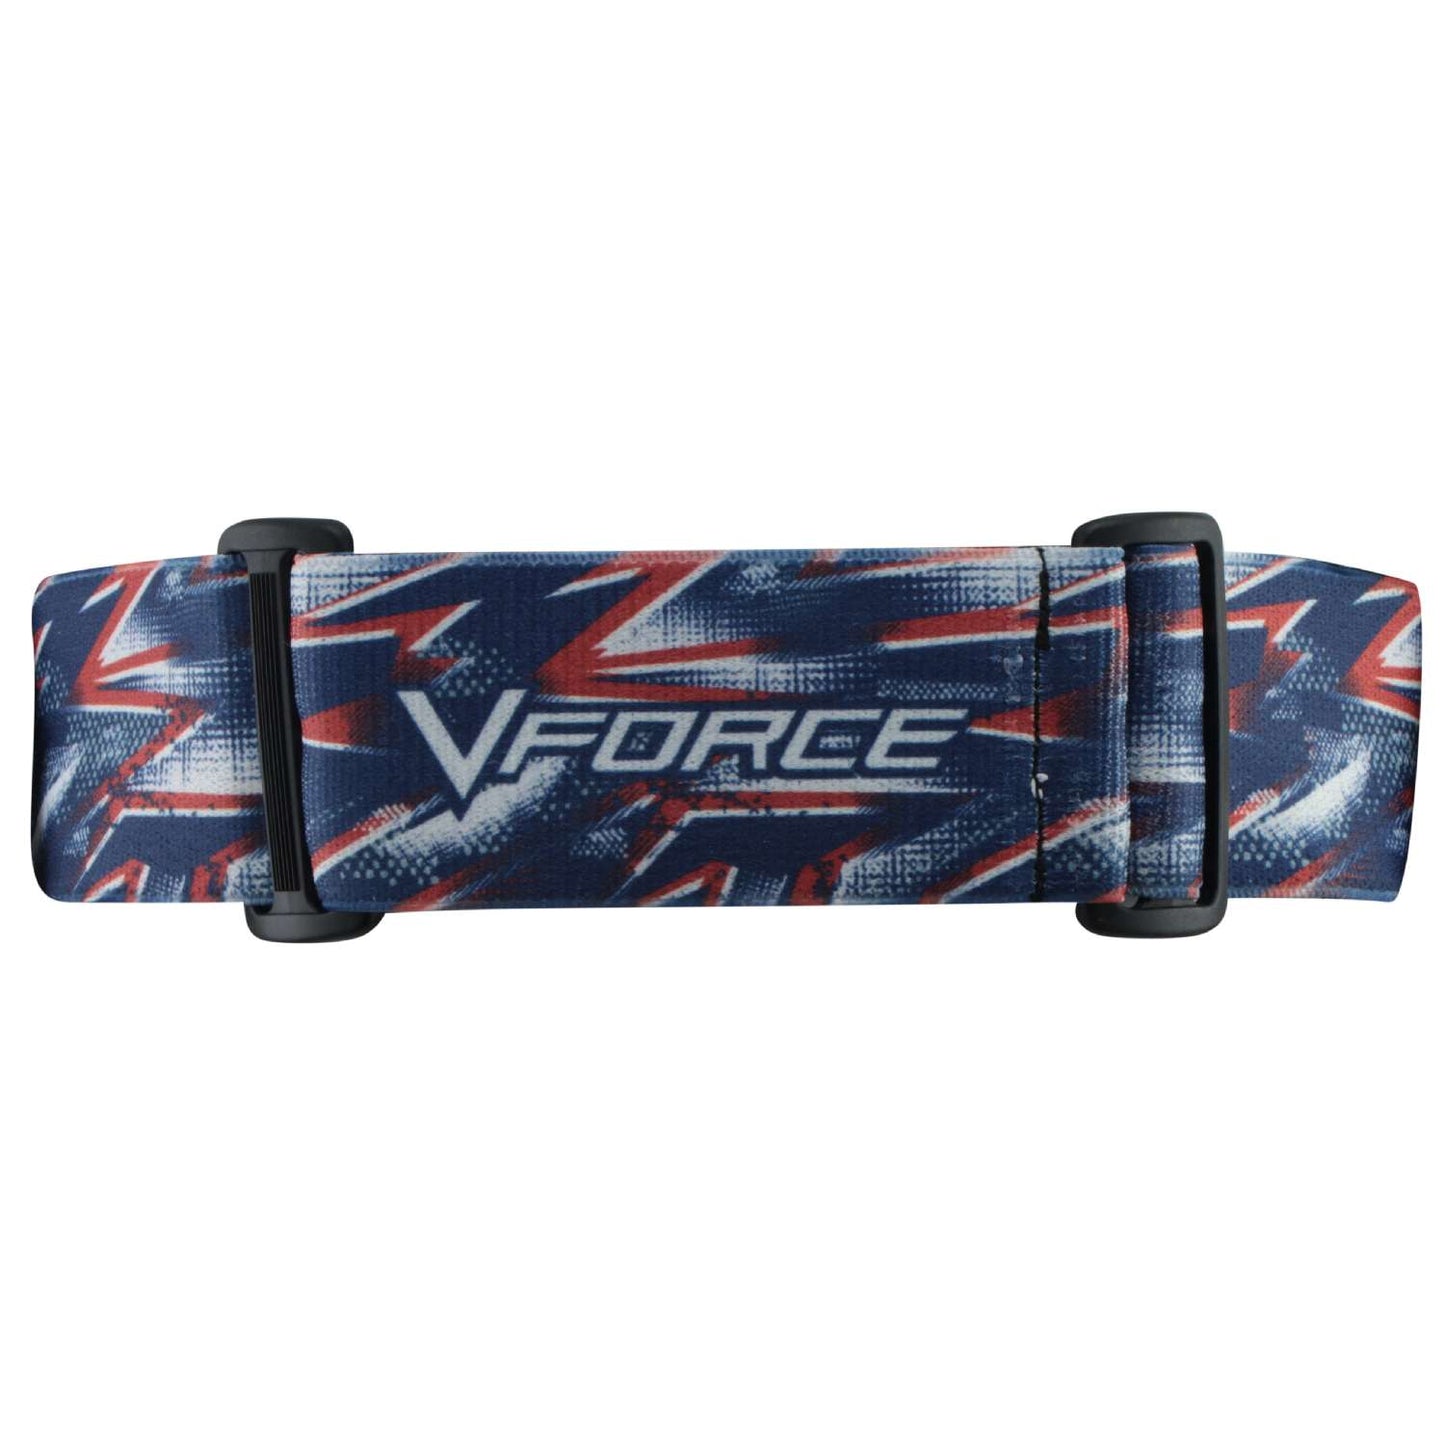 VForce Grill SE Spangled Hero w/ Smoke Lens Only